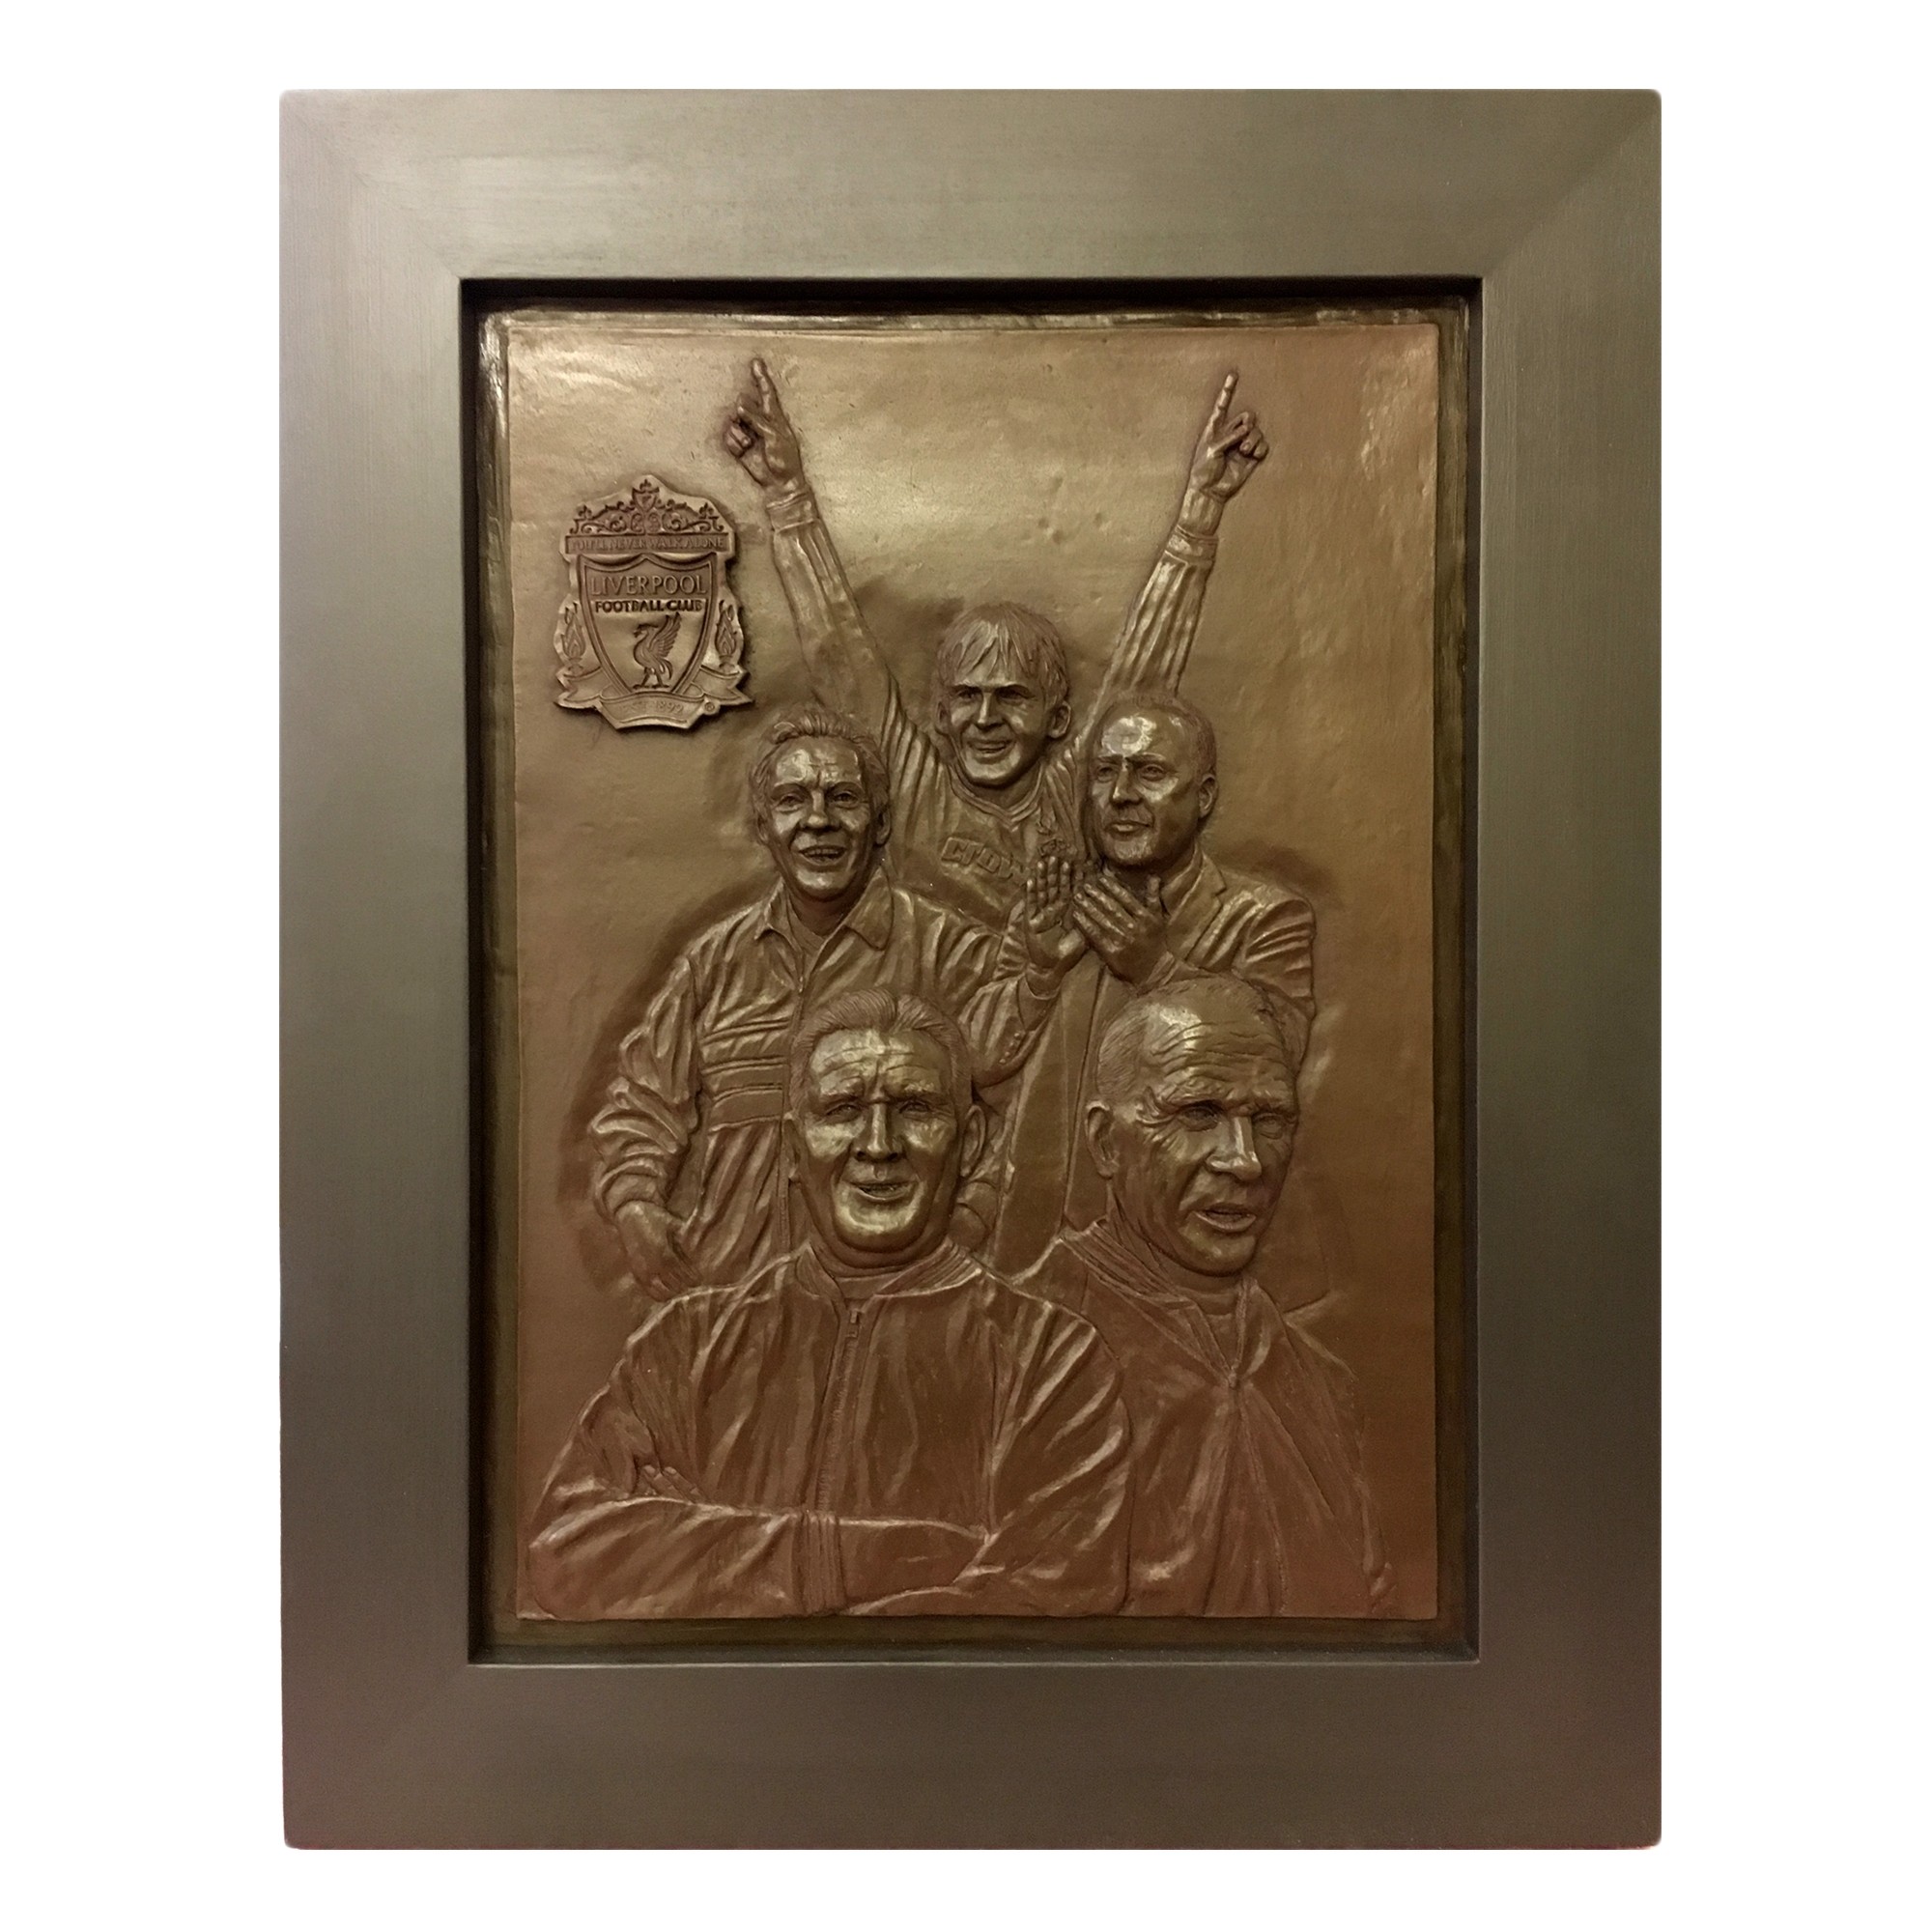 LFC Limited Edition Framed Managers Bonded Bronze Art